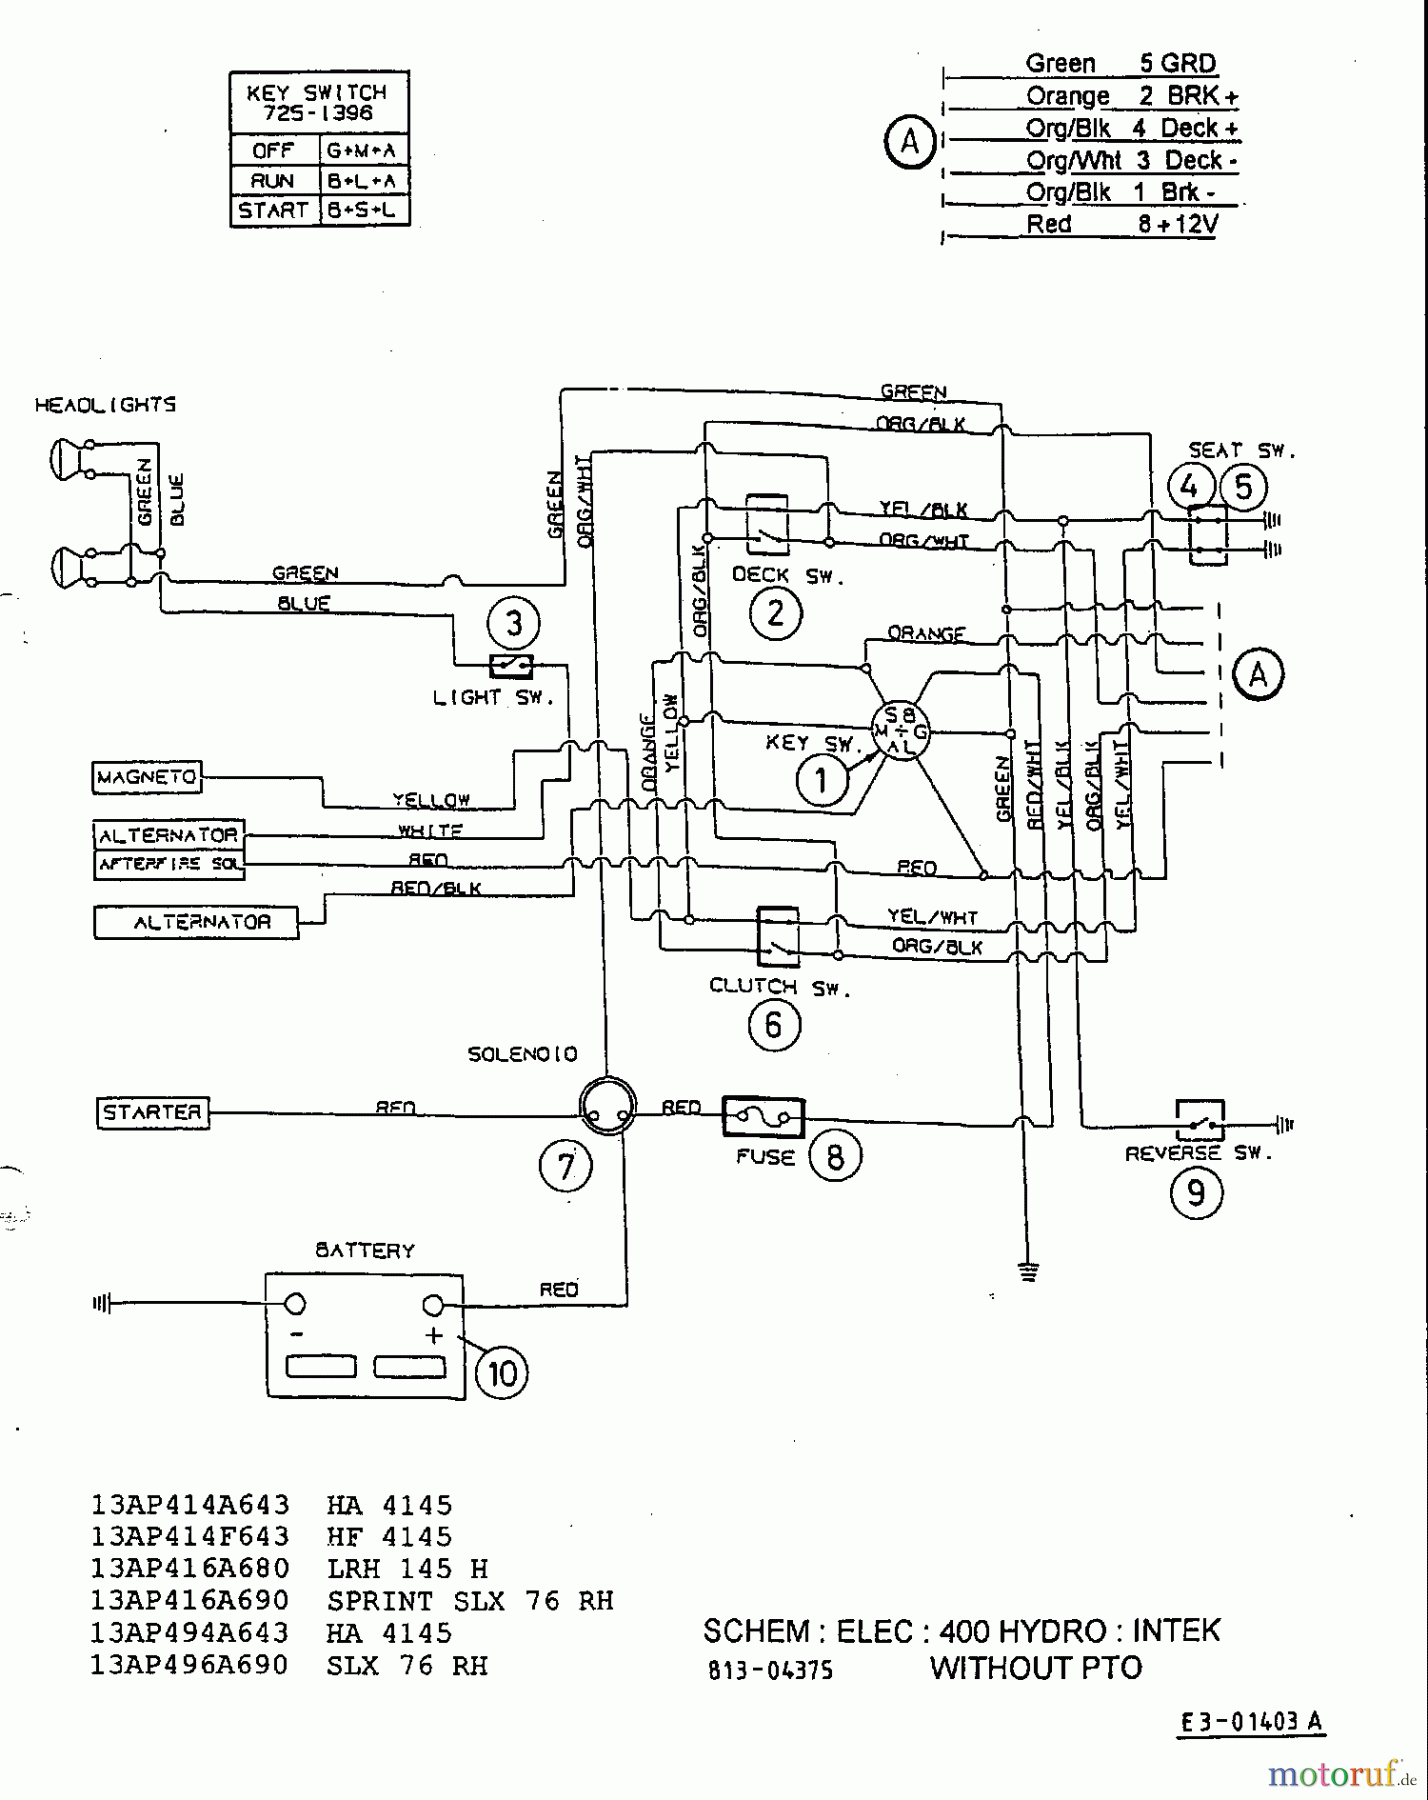  White Lawn tractors LRH 160 E 13AD493E679  (1999) Wiring diagram Intek without electric clutch